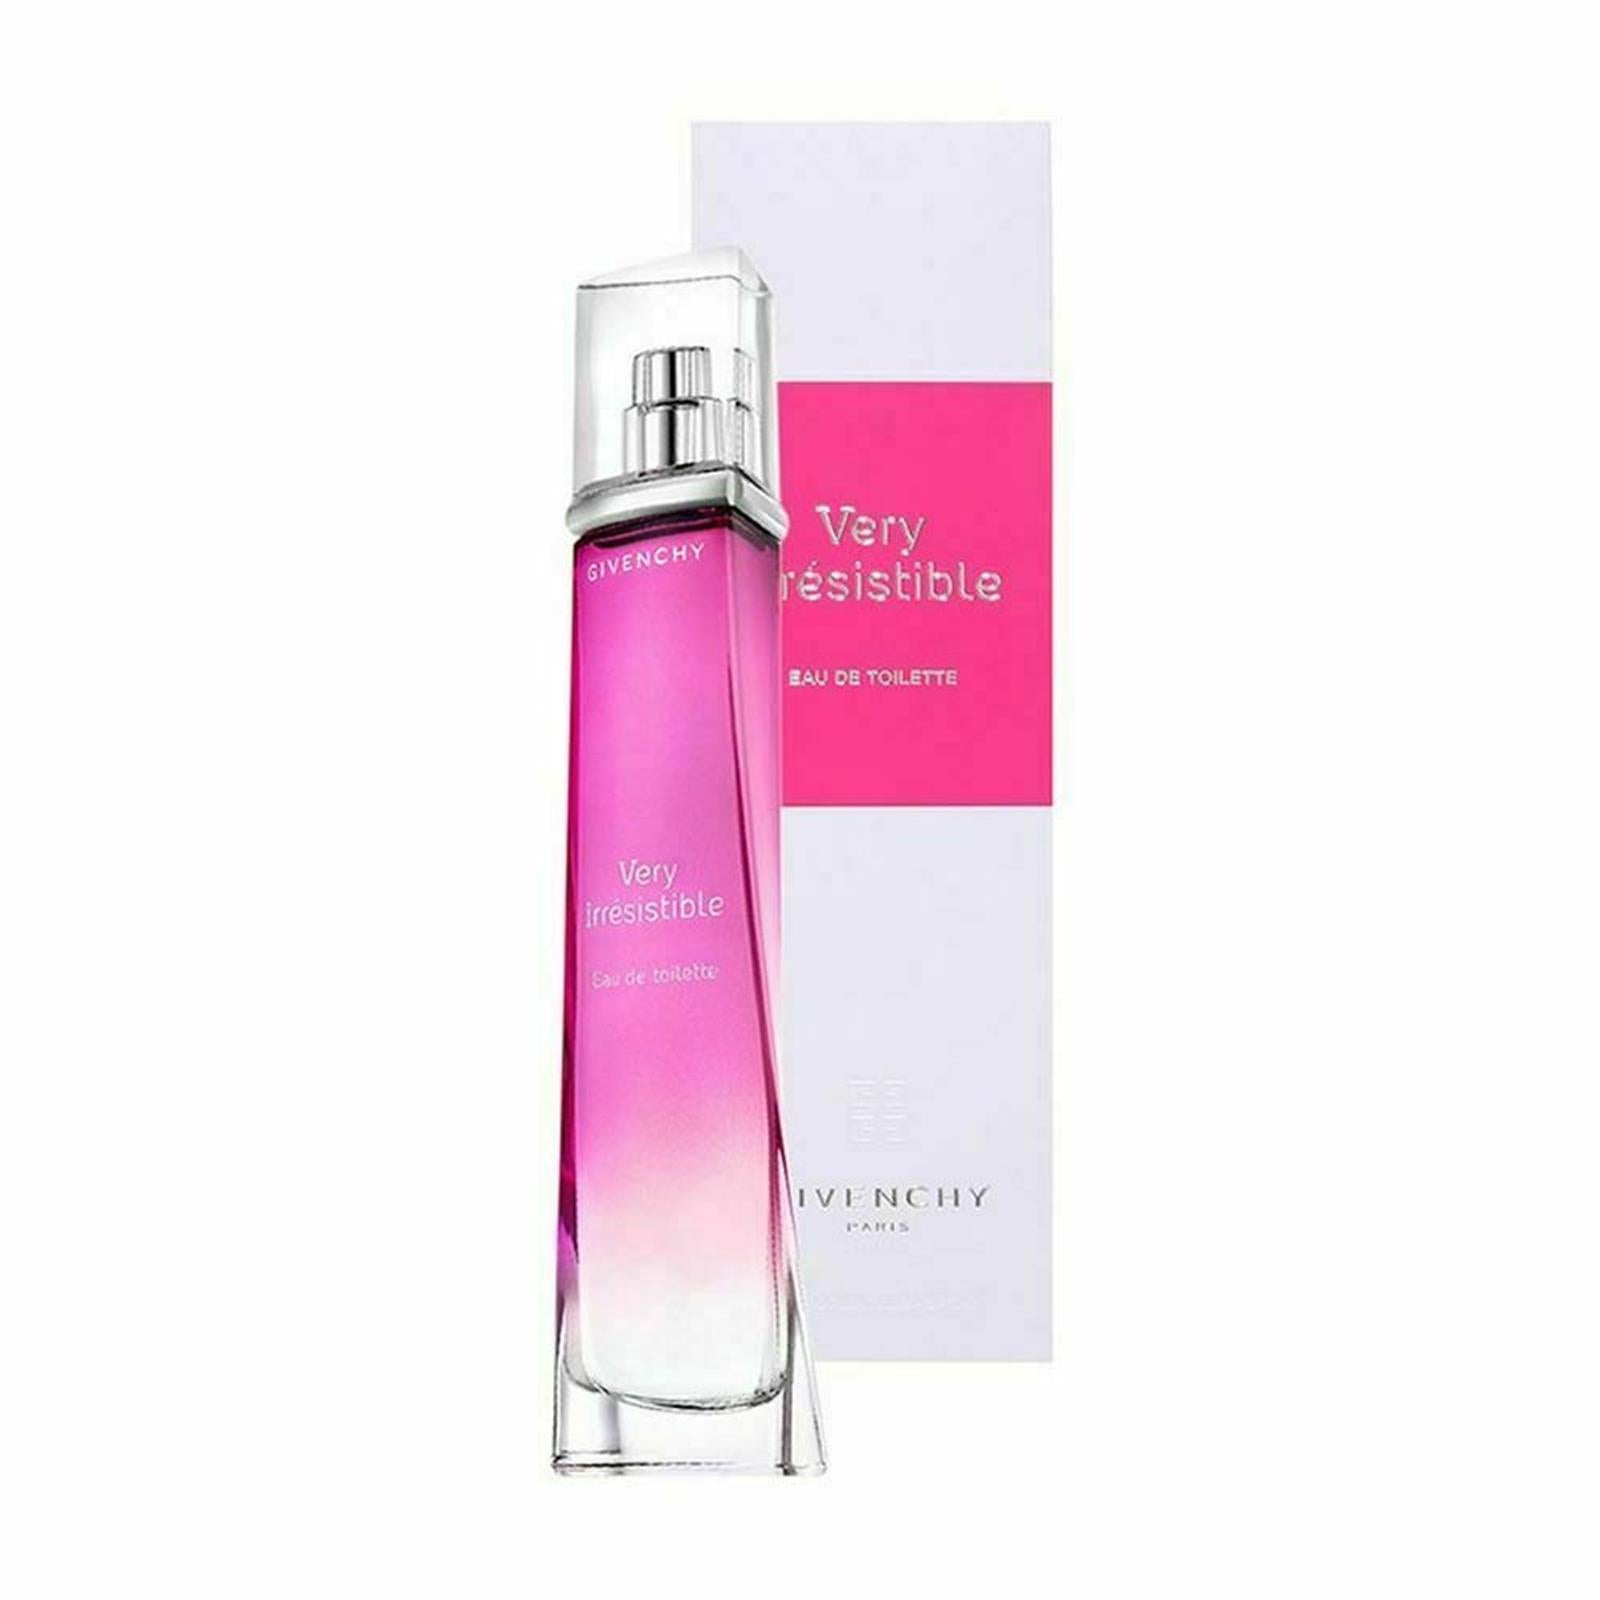 Givenchy irresistible toilette. Givenchy very irresistible Eau de Toilette 75 ml. Givenchy very irresistible 50. Givenchy very irresistible Eau de Parfum. Givenchy very irresistible Lady EDT 50 ml.